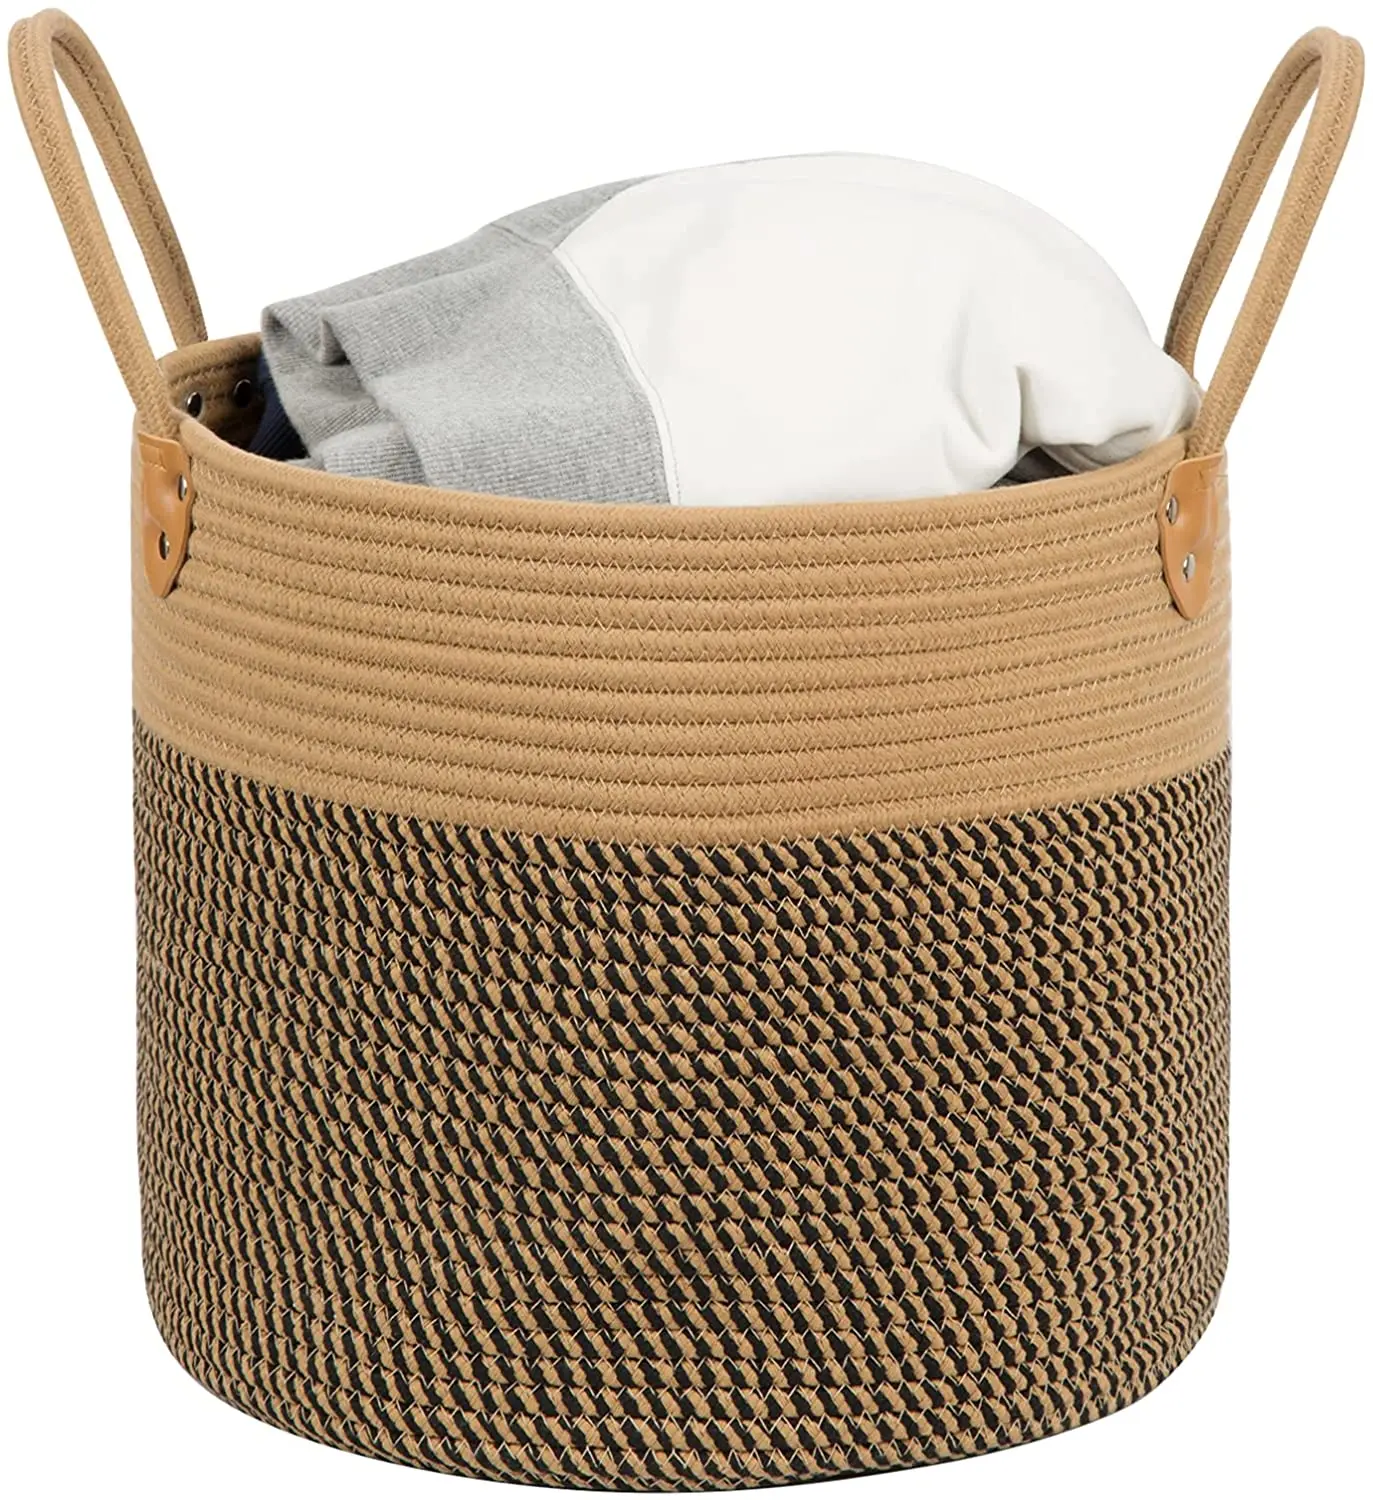 

Pattern Woven Cotton Rope Storage Basket With Uncovered Basket Cotton rope storage basket, Customized color